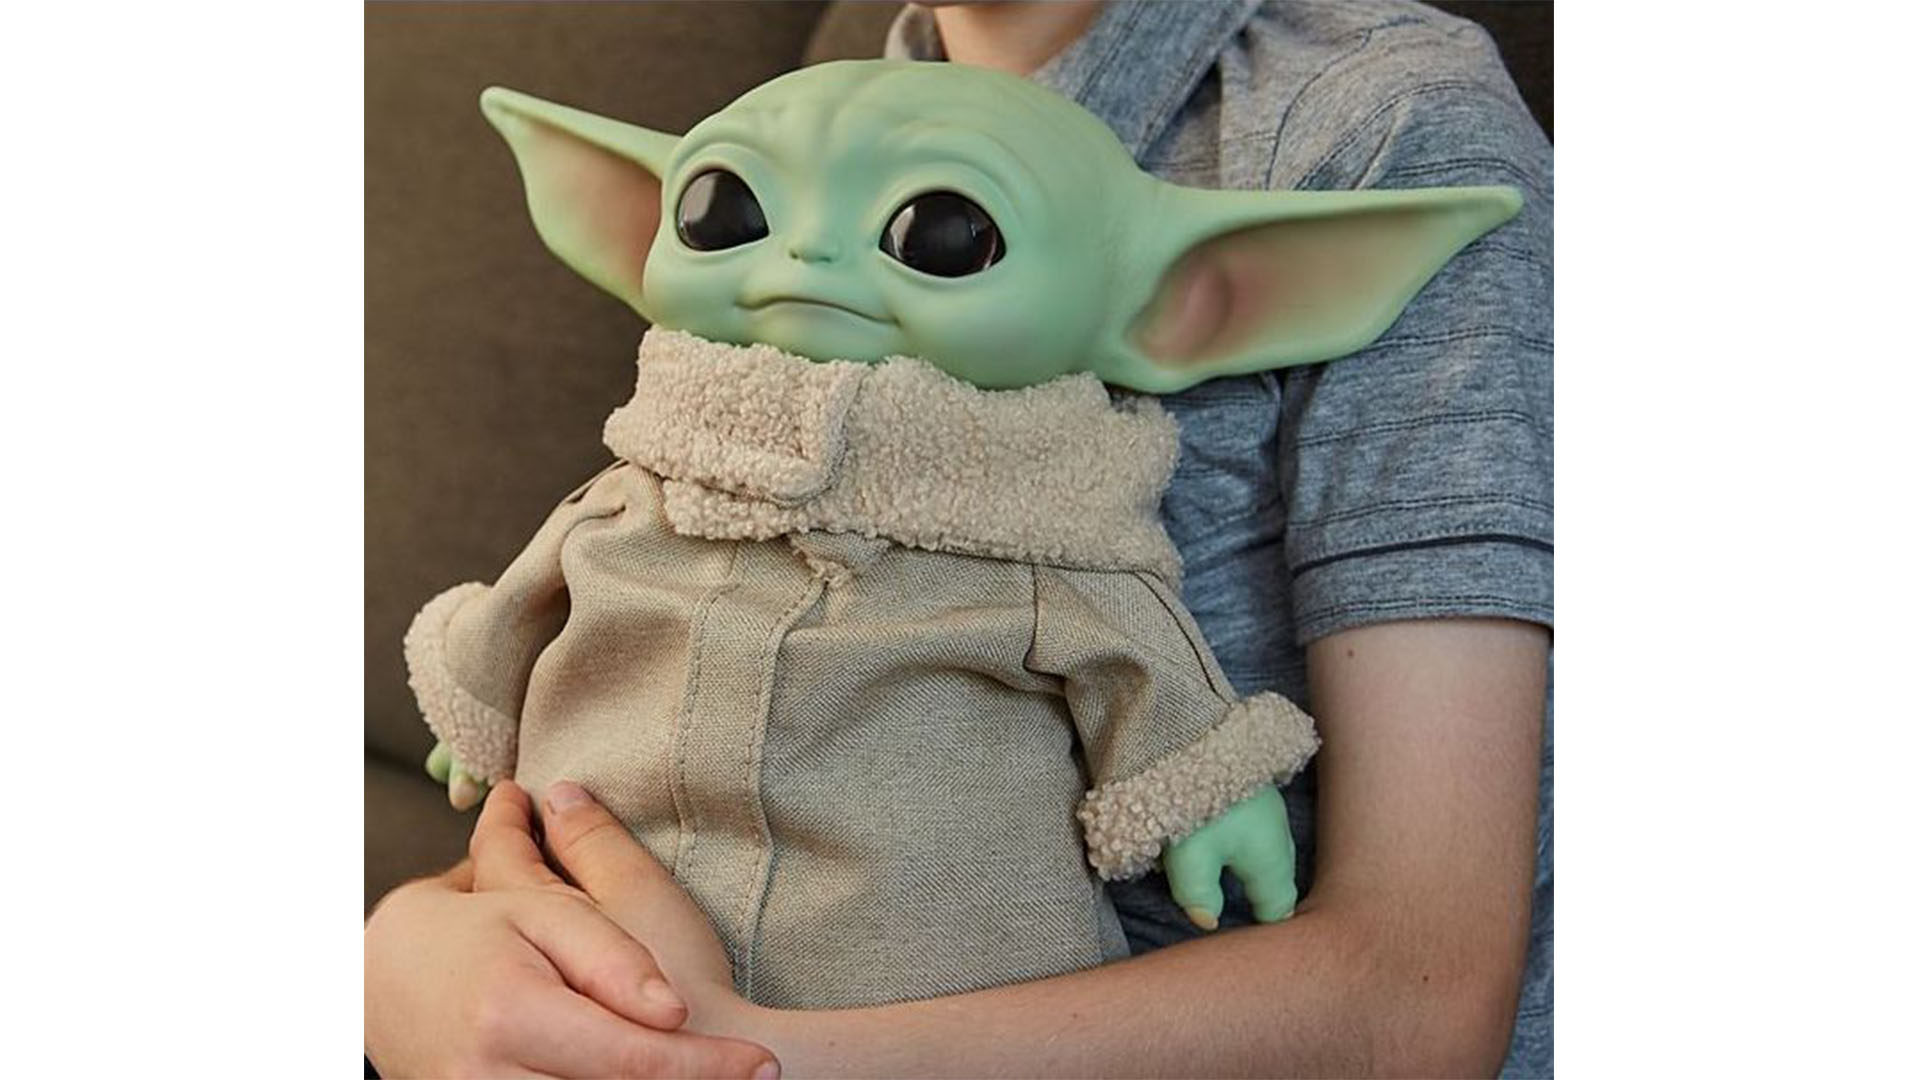 A close-up of a young person holding a life-sized Mattel plush of The Child from Star Wars: The Mandalorian.